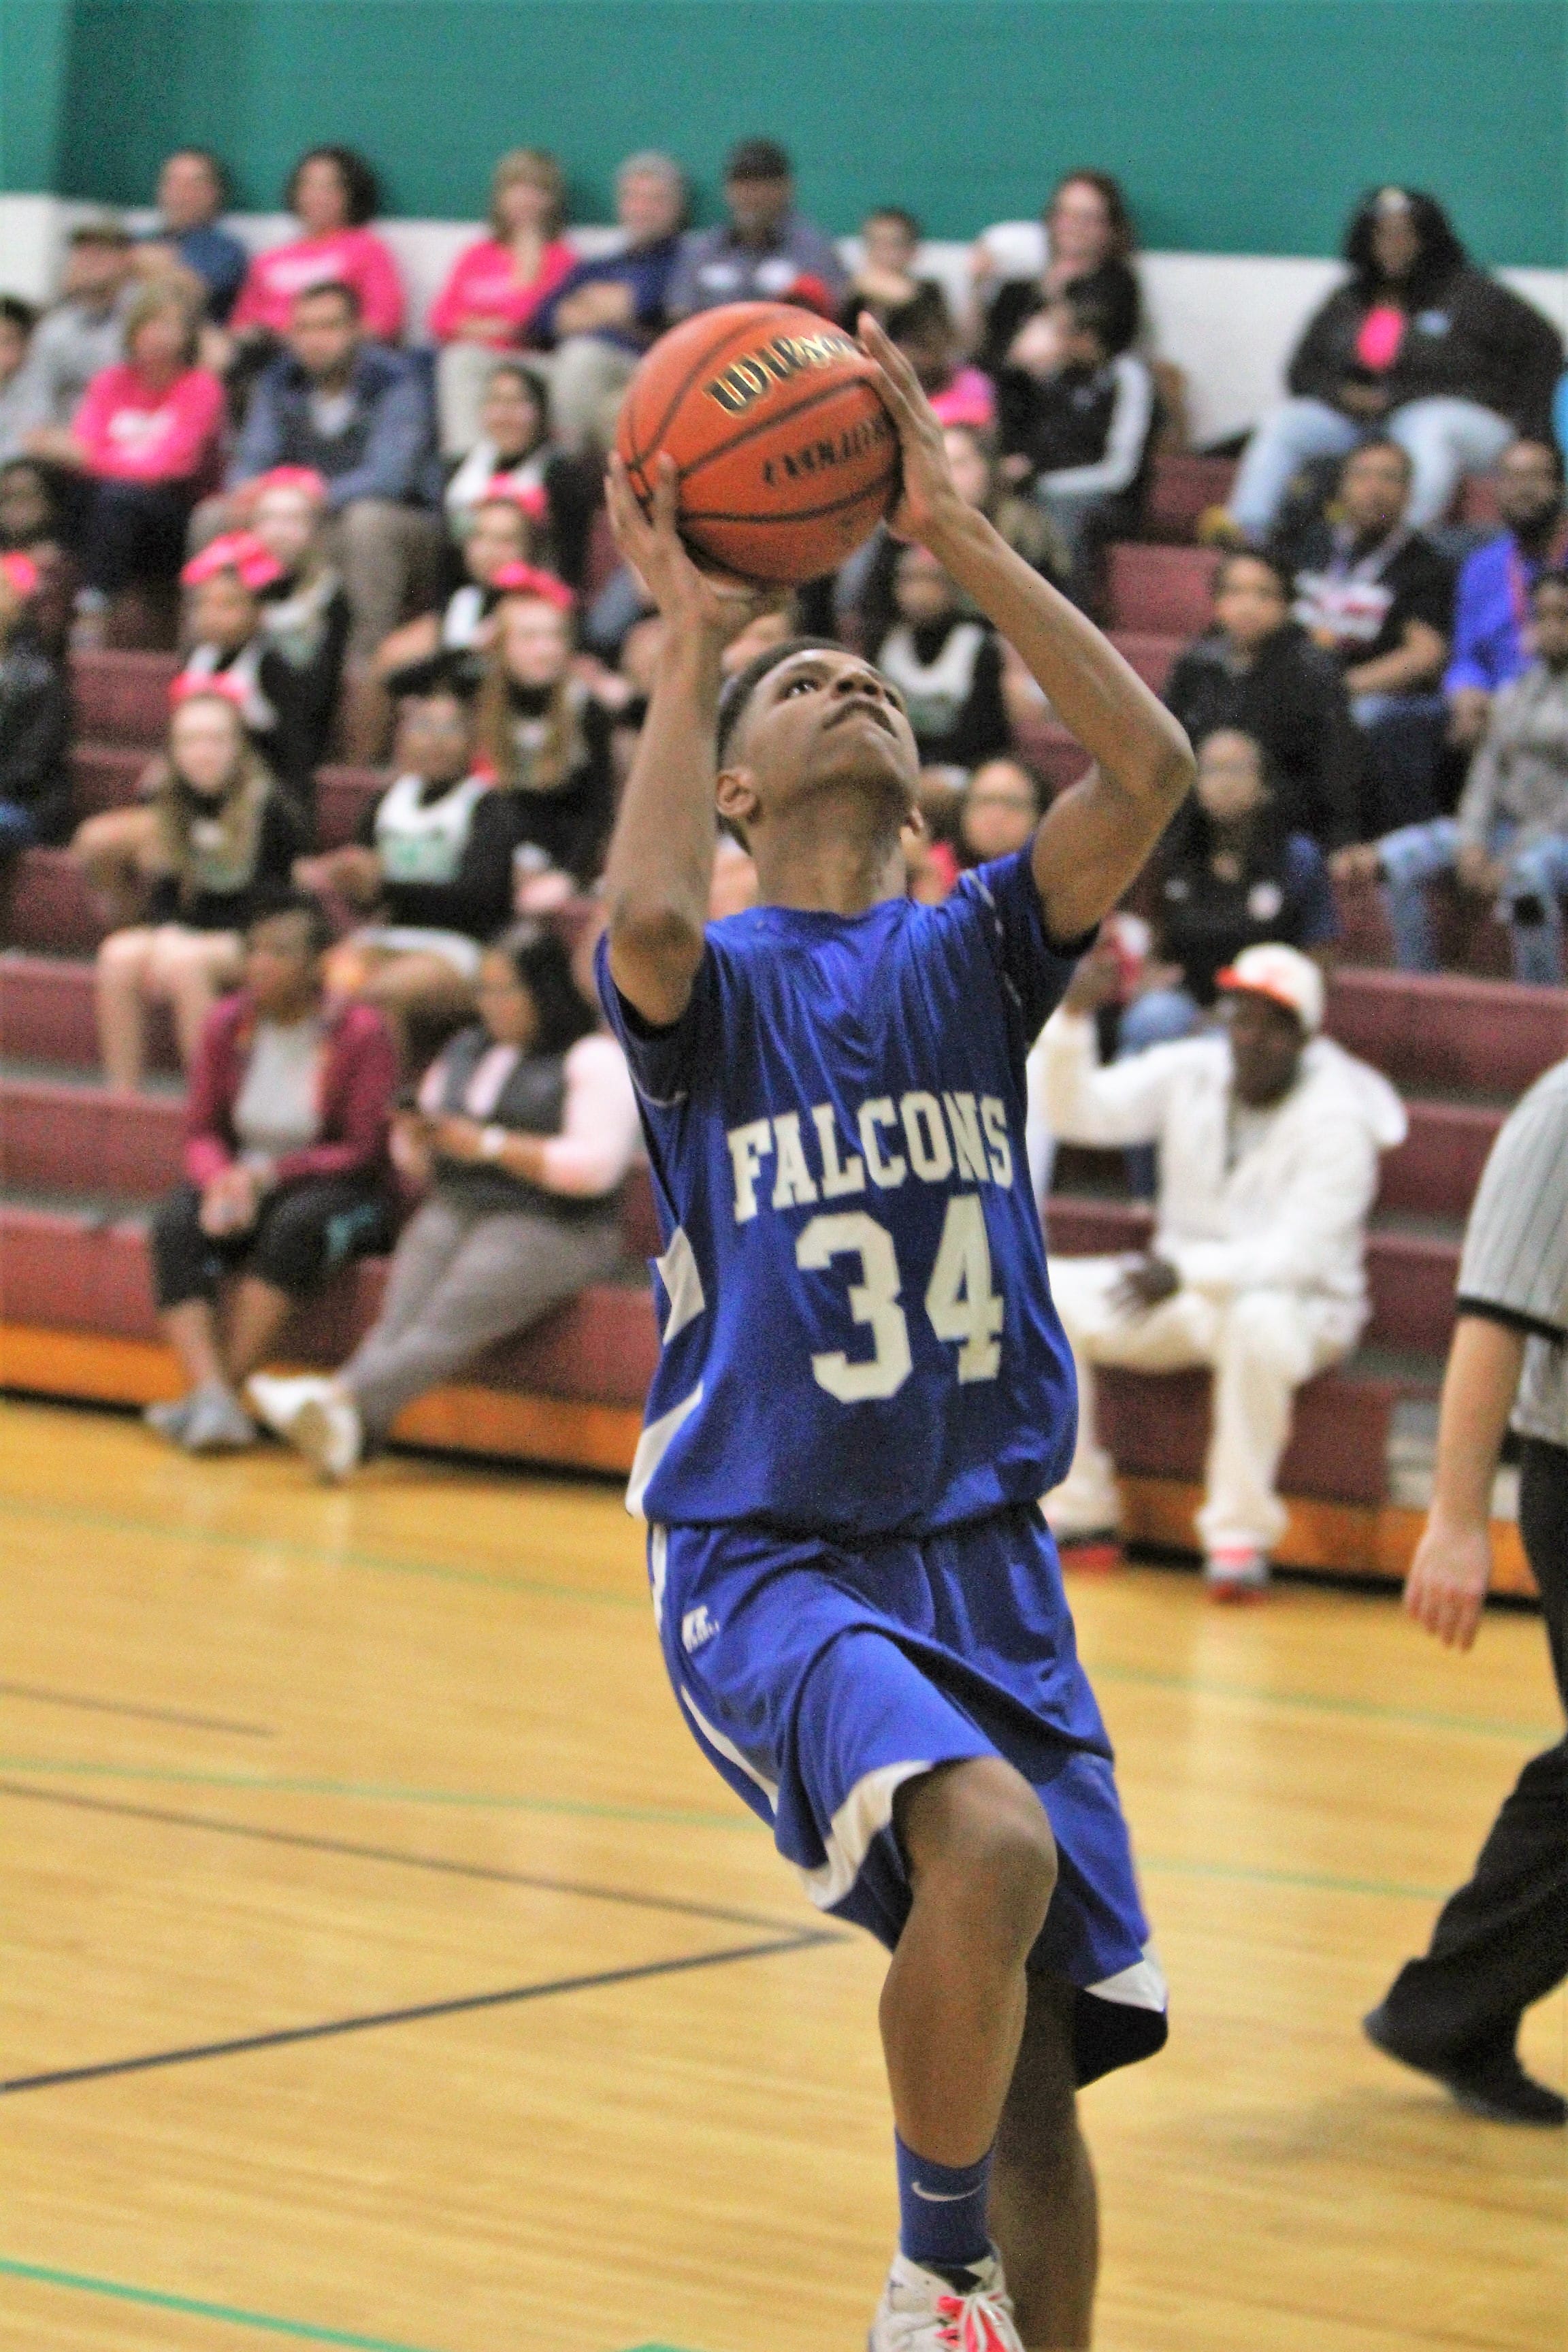 Coats-Erwin wins two games at Dunn, Falcon teams atop standings